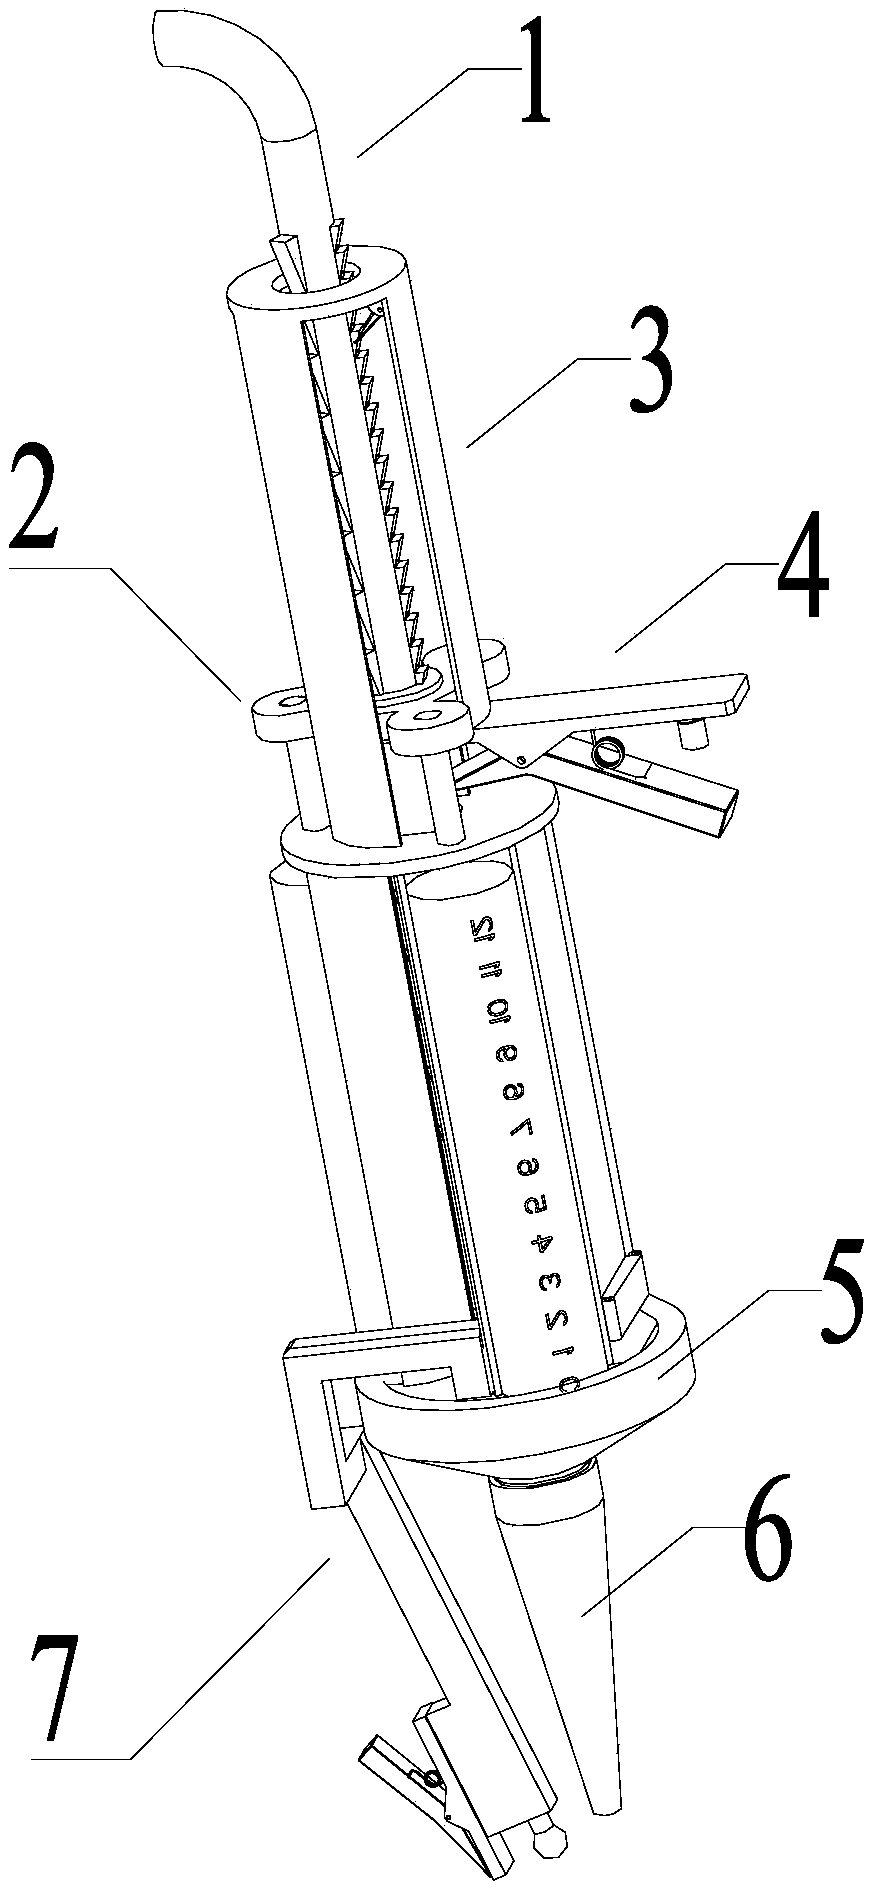 Device for panting sewing glue used in building decoration